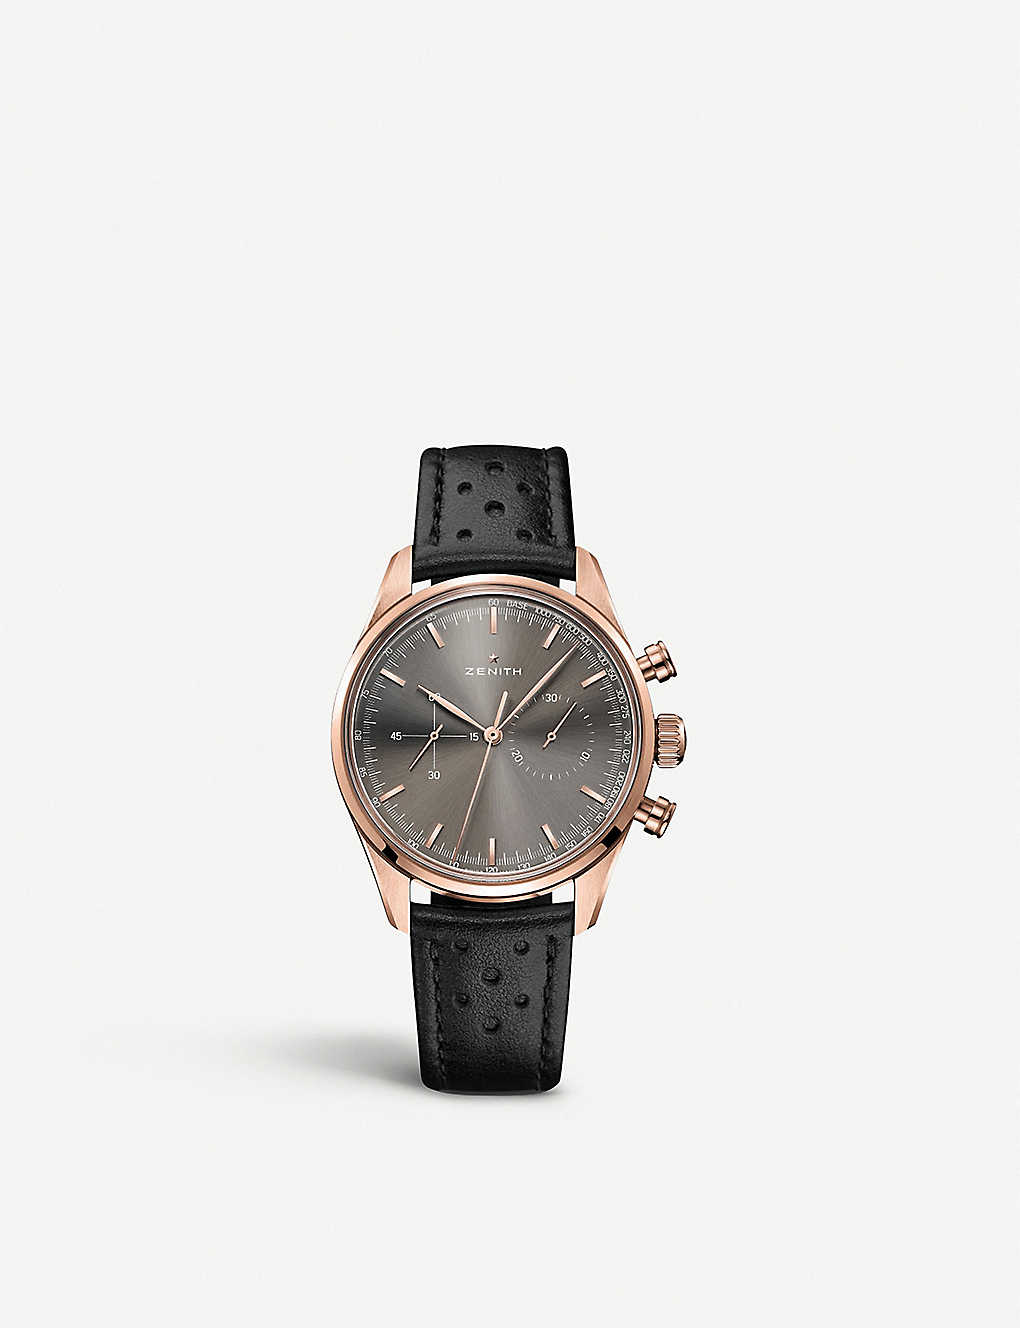 ZENITH 18.2150.4069/91.C812 CHRONOMASTER HERITAGE 146 ROSE-GOLD AND LEATHER WATCH,757-10001-182150406991C812